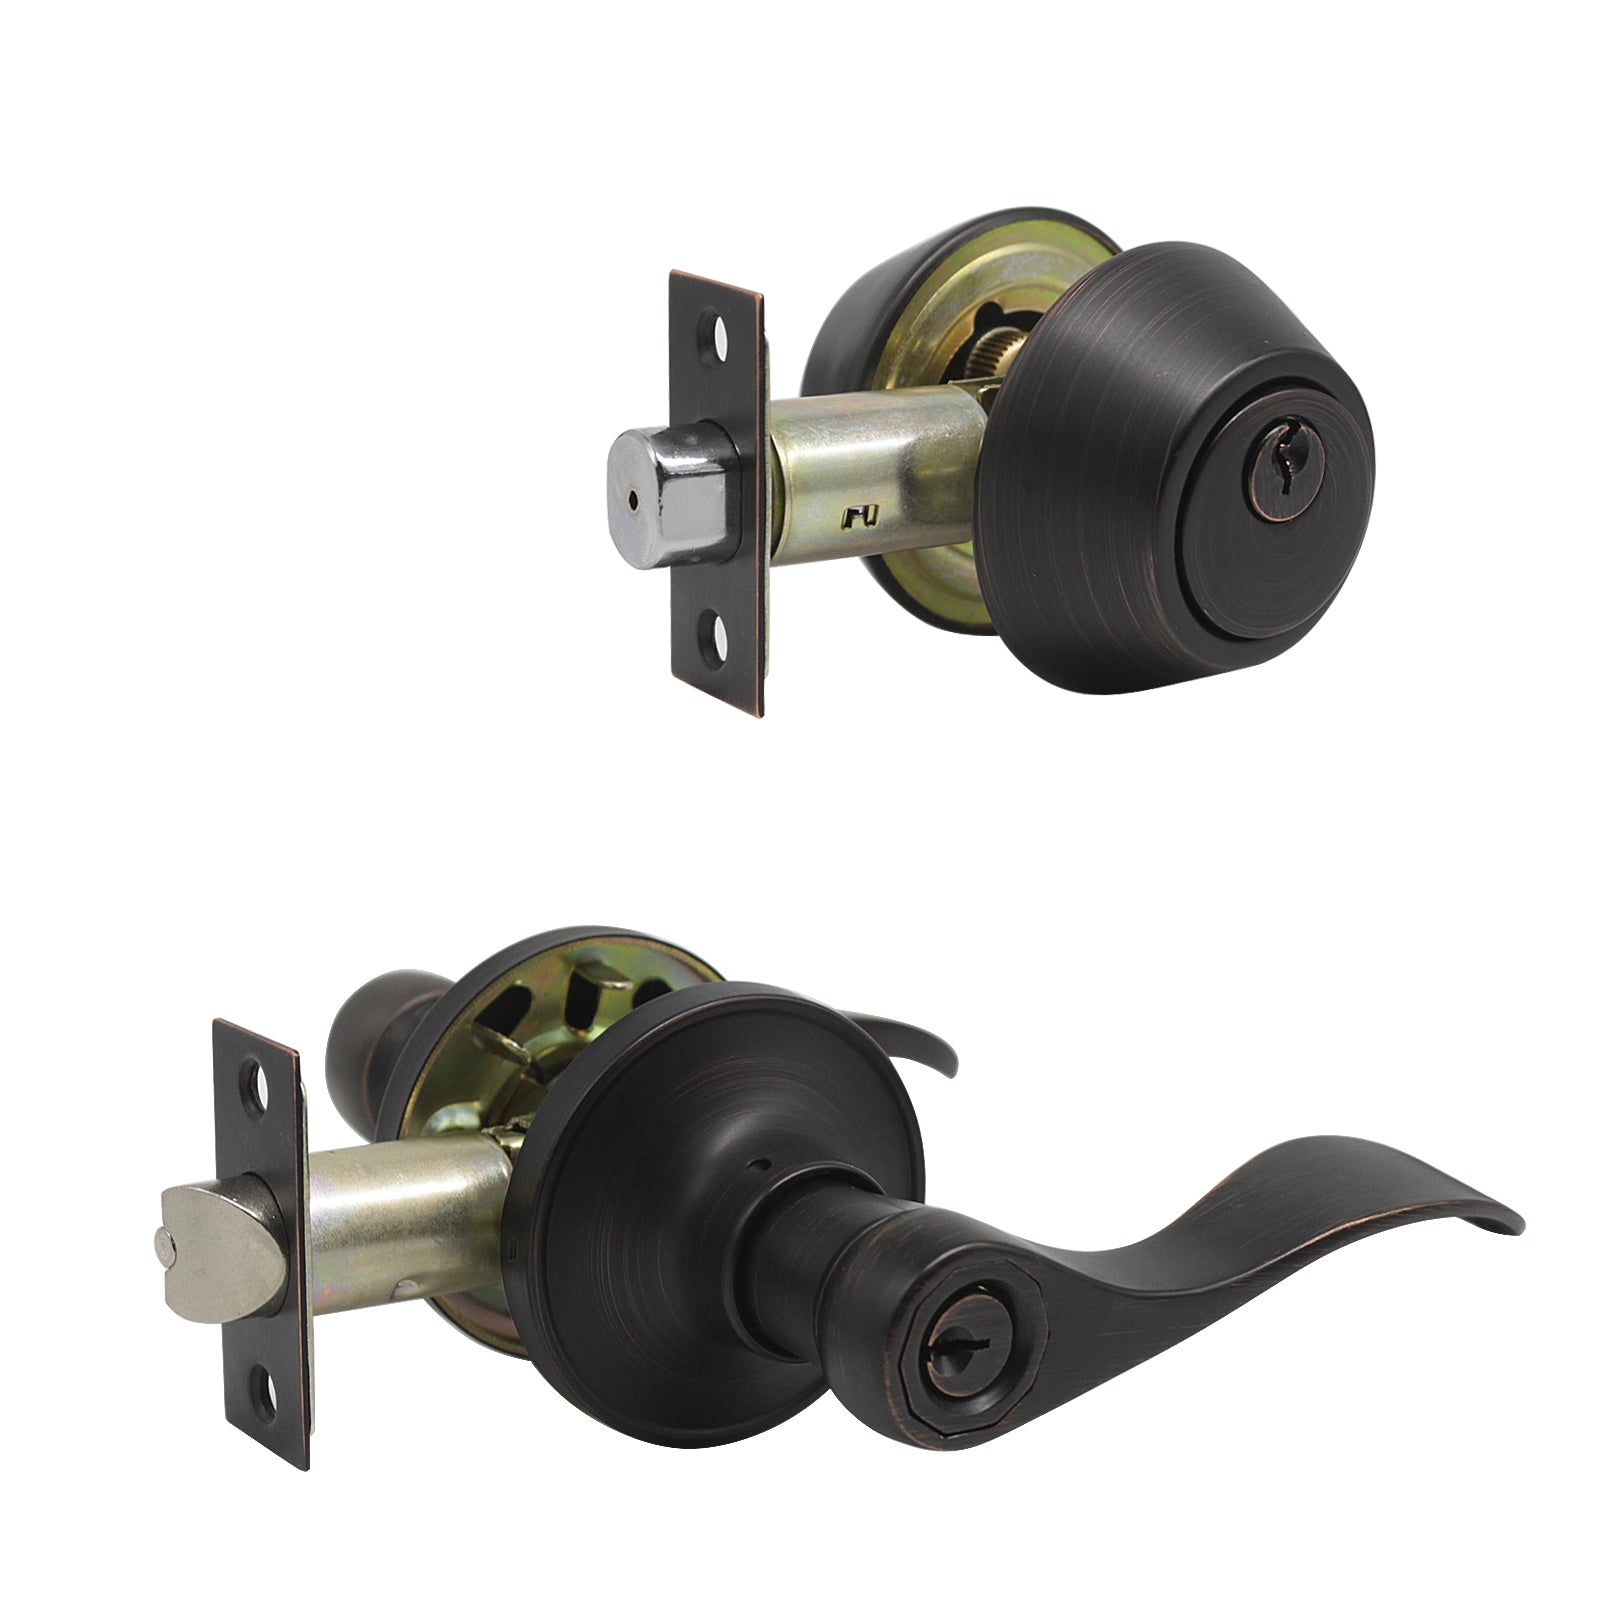 Entry Keyed Door Levers Lock with Double Cylinder Deadbolts Keyed Alike, Oil Rubbed Bronze Finish DL12061ET-102ORB - Probrico